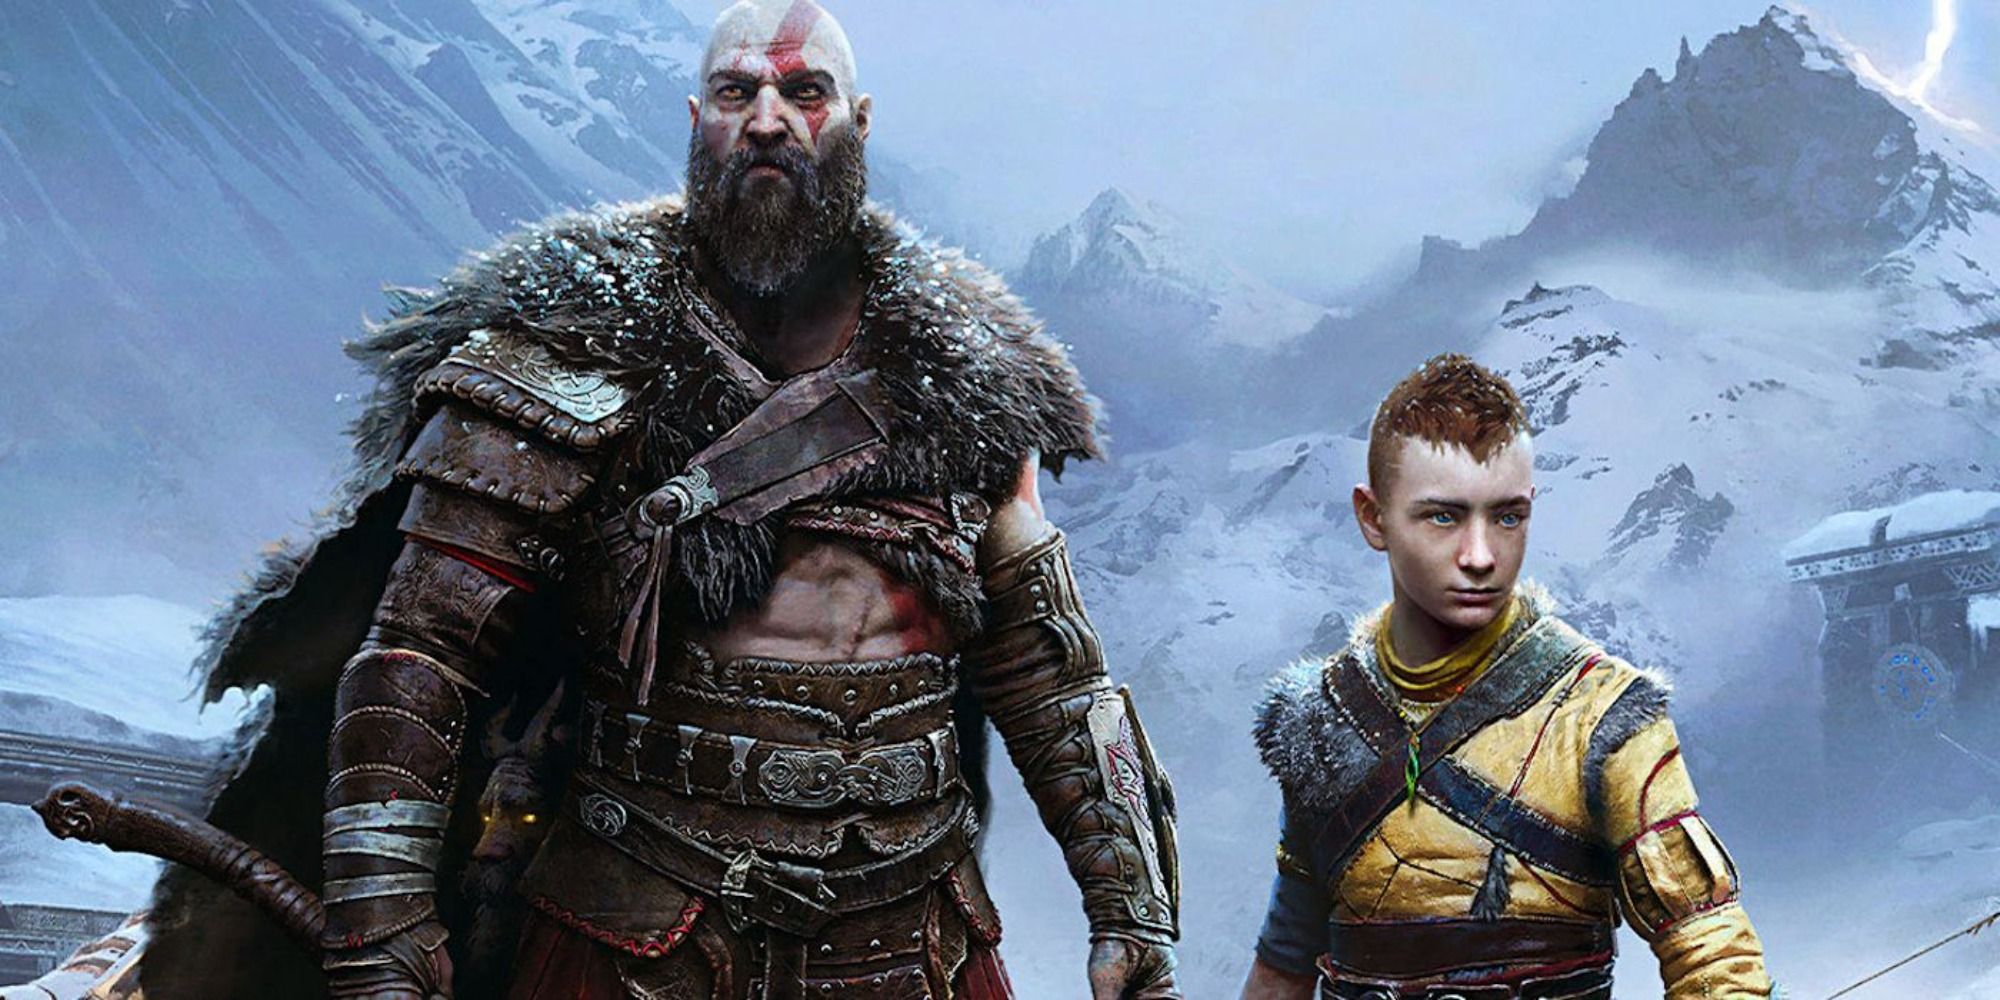 Kratos & Atreus Ragnarok screenshot with Atreus in yellow on the right and Kratos on the left